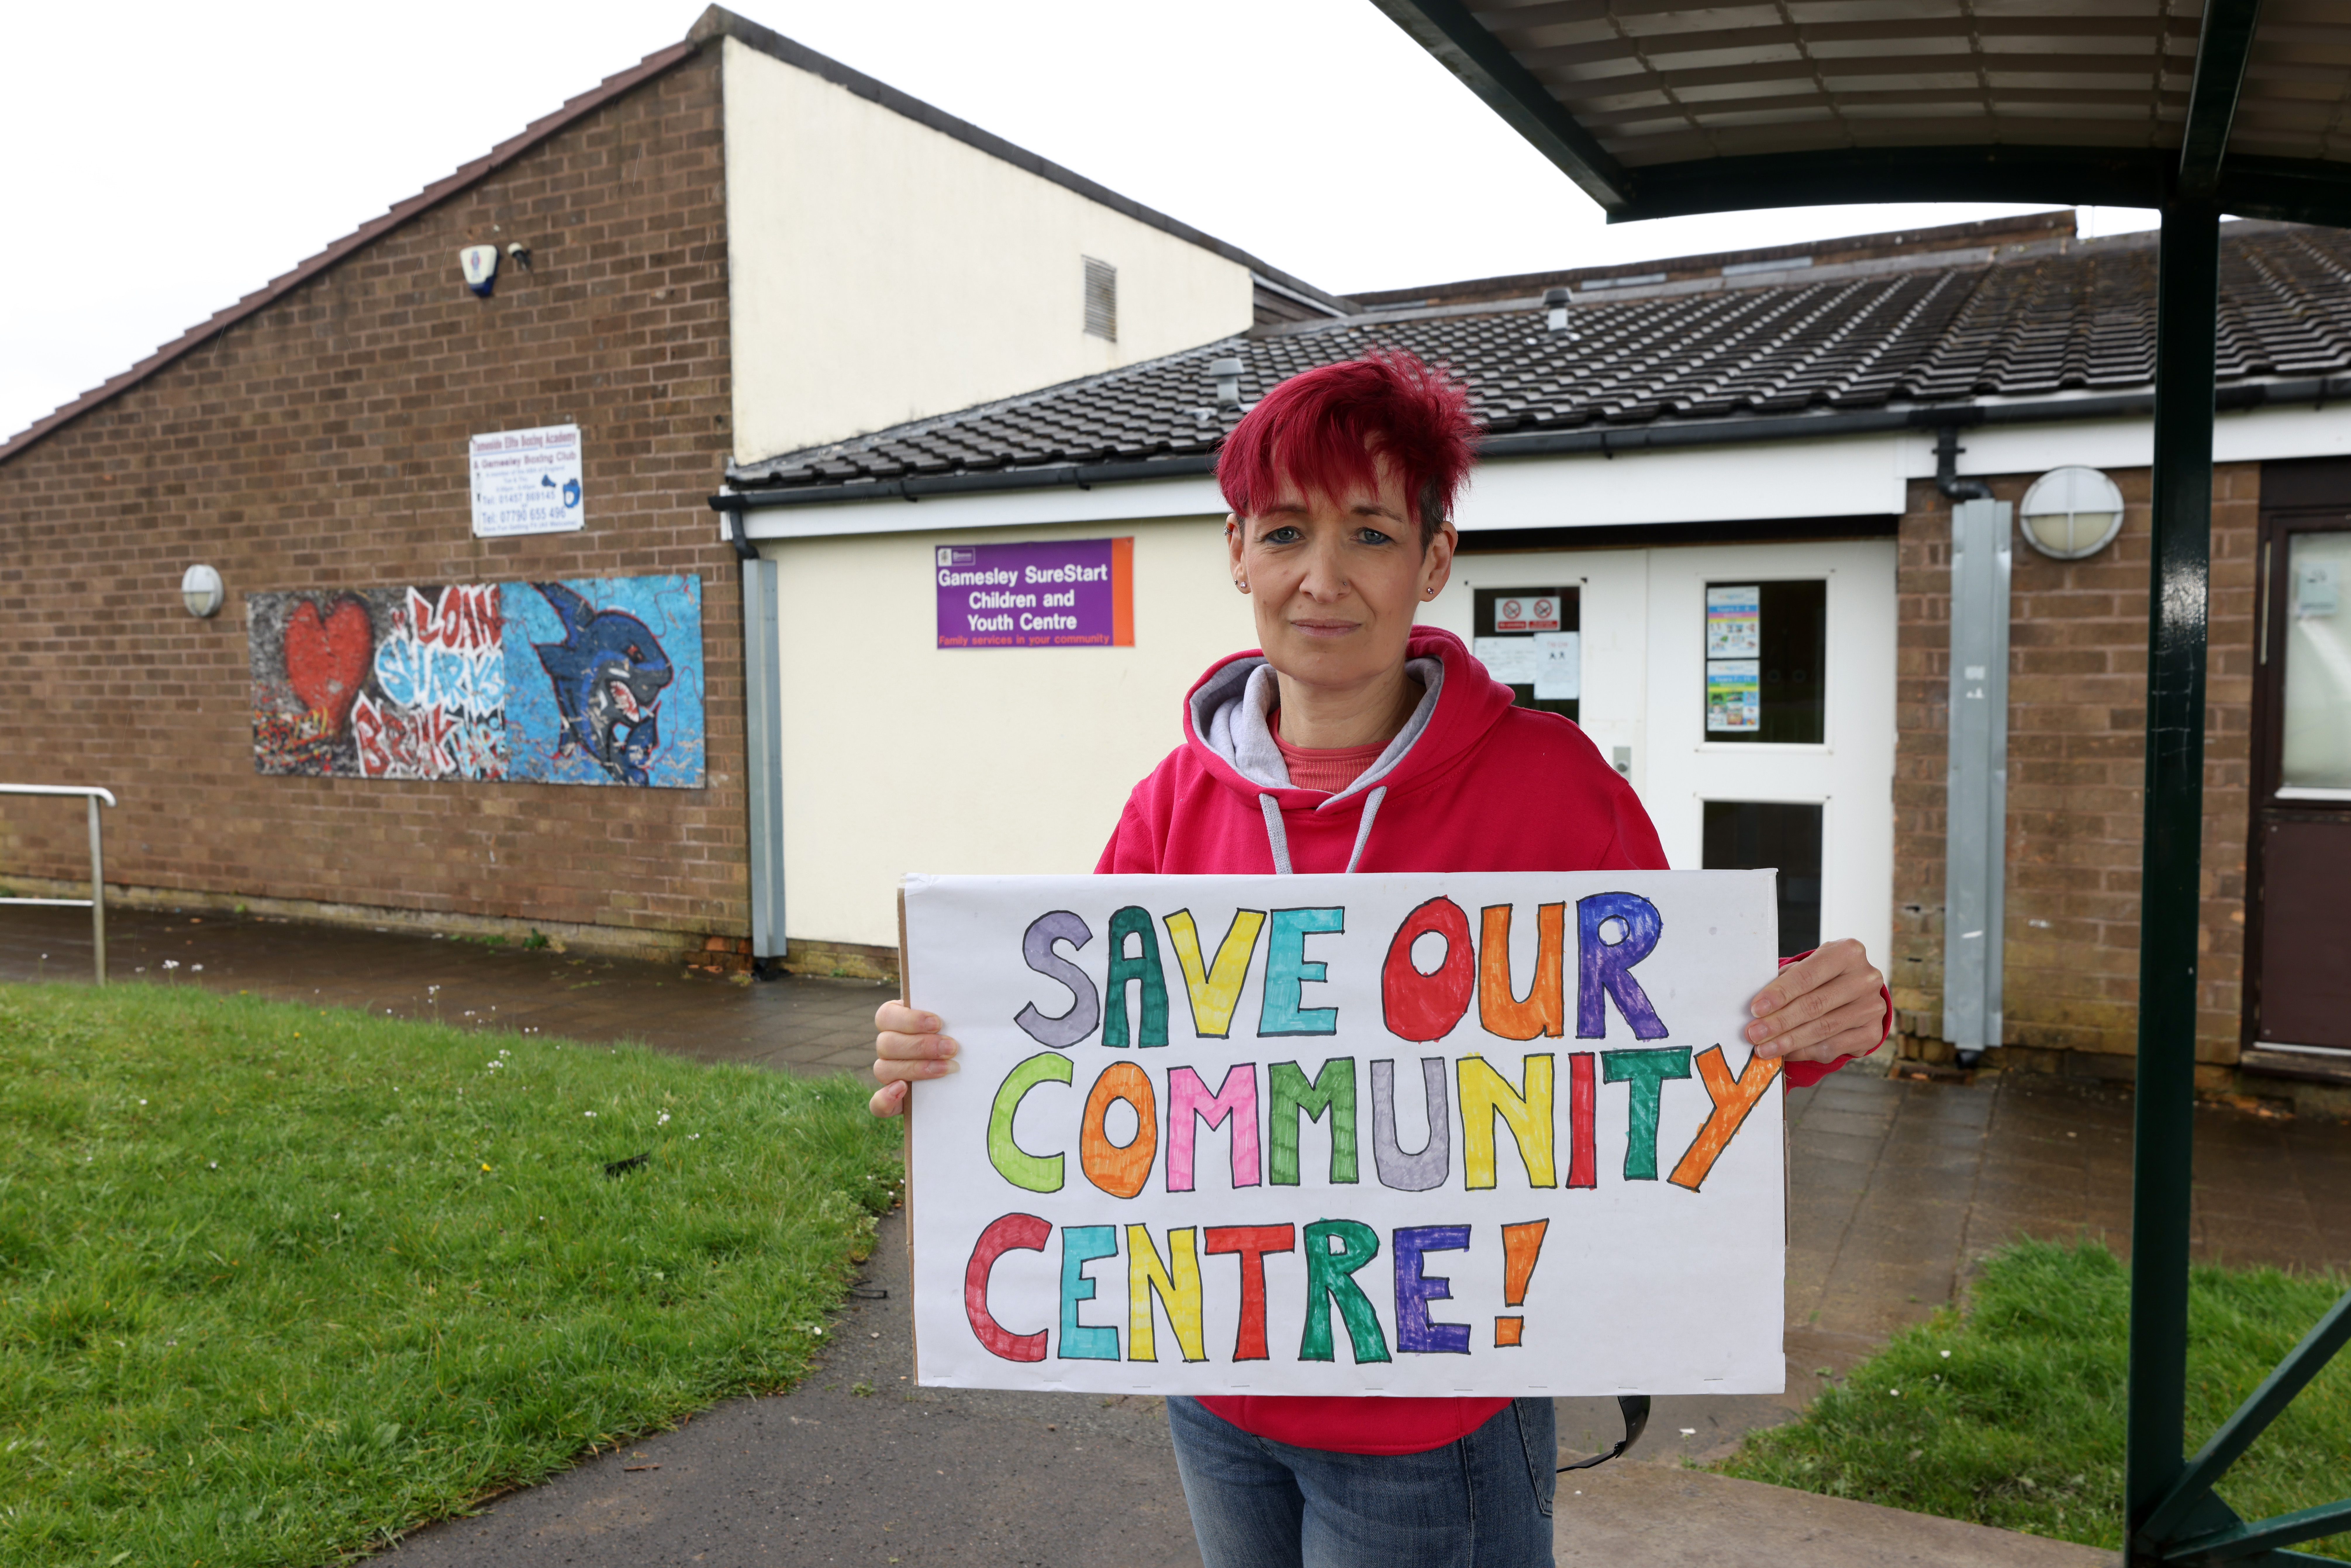 Helen Thornhill, who helps run The Hangout Youth Club, is trying to save the community centre